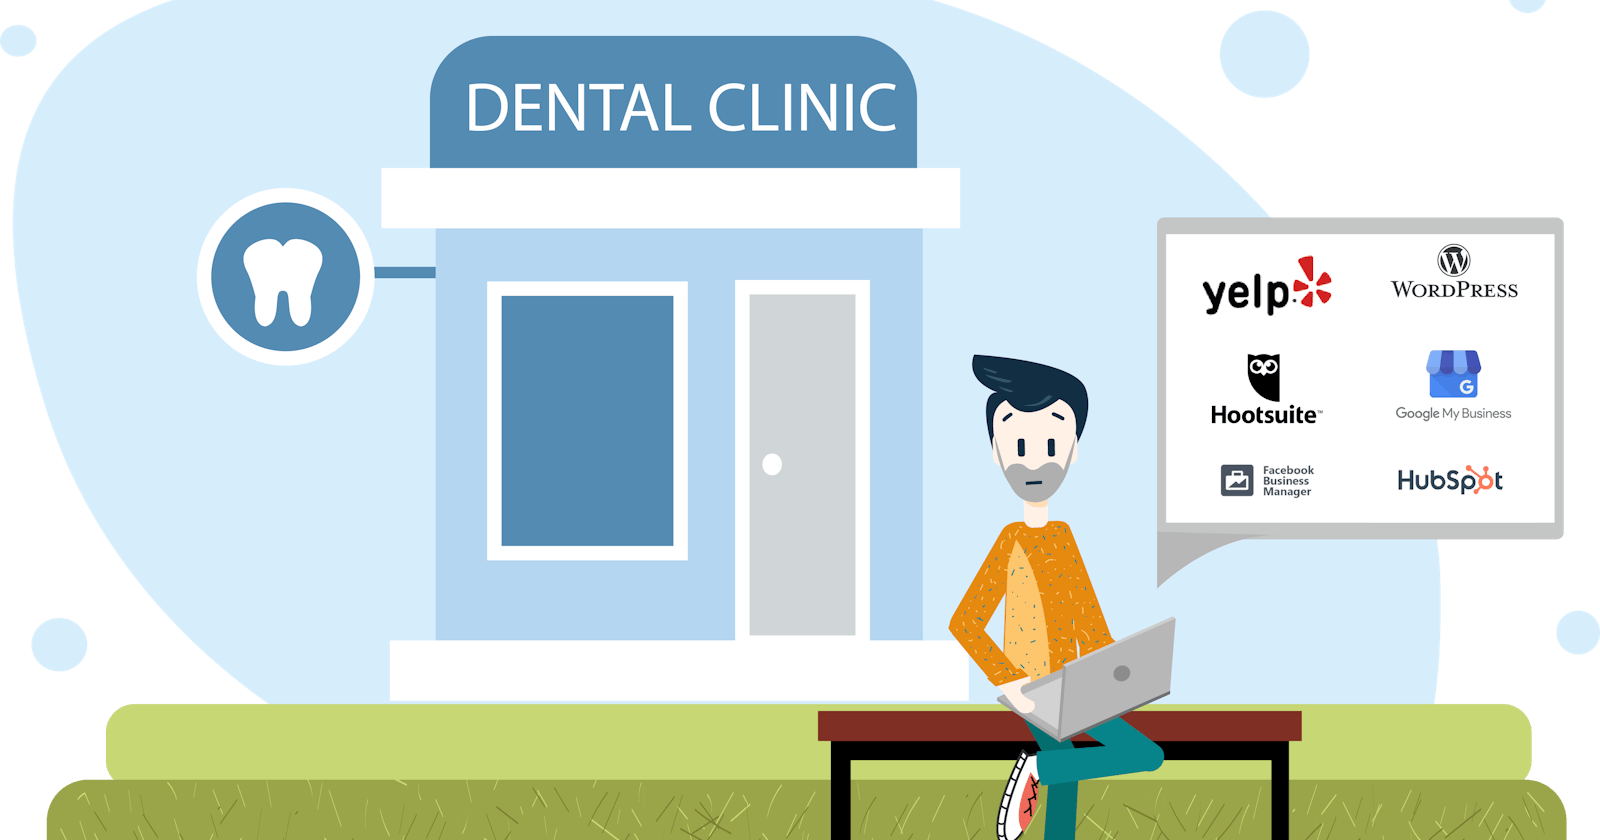 How to acquire new patients with Digital Marketing for Dentists